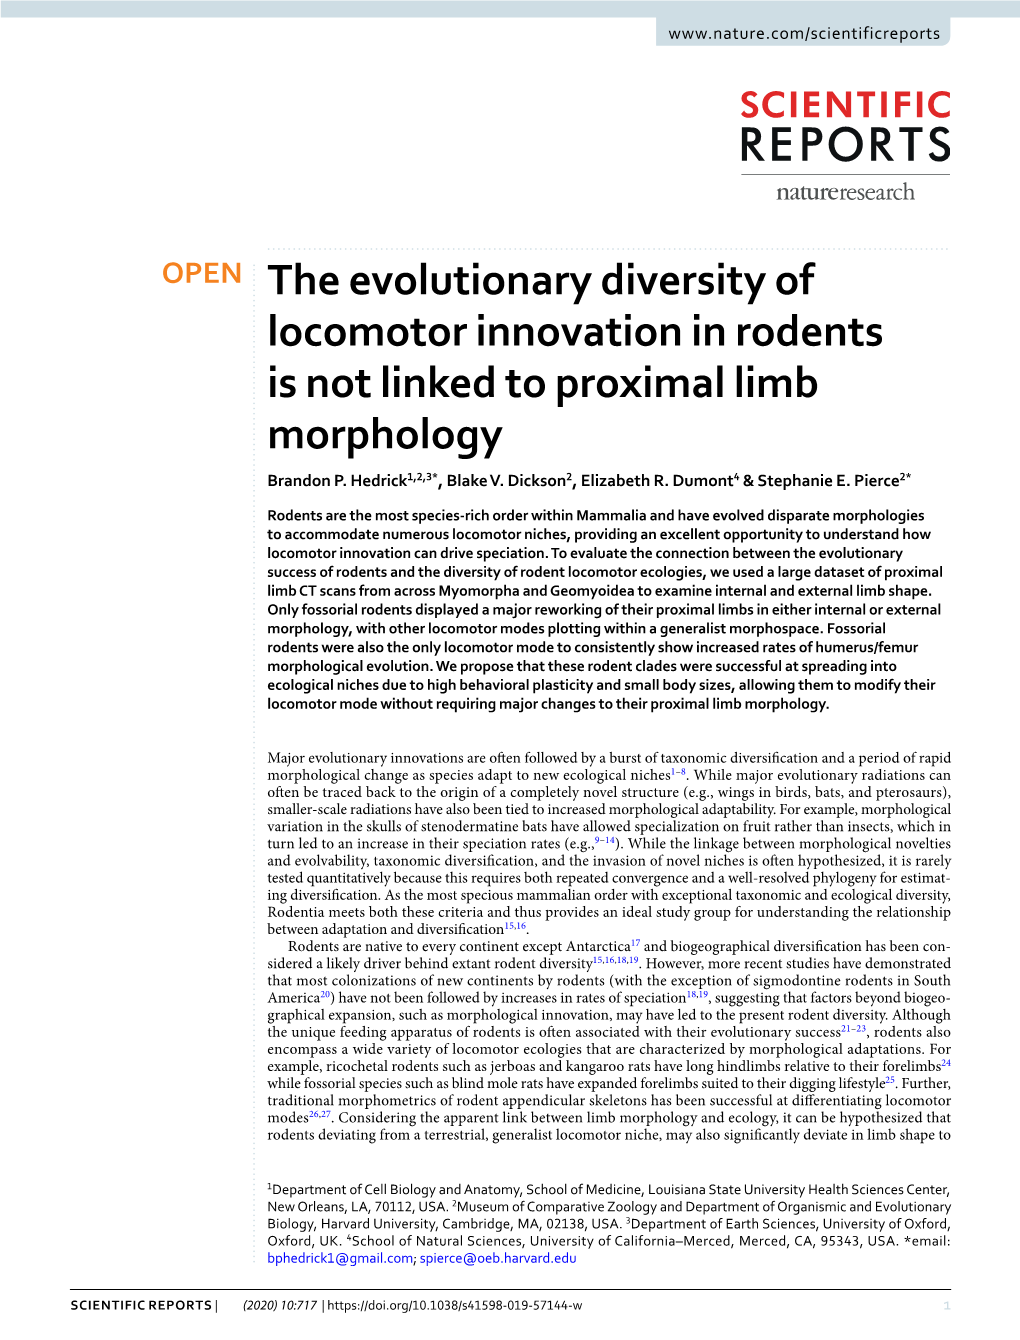 The Evolutionary Diversity of Locomotor Innovation in Rodents Is Not Linked to Proximal Limb Morphology Brandon P